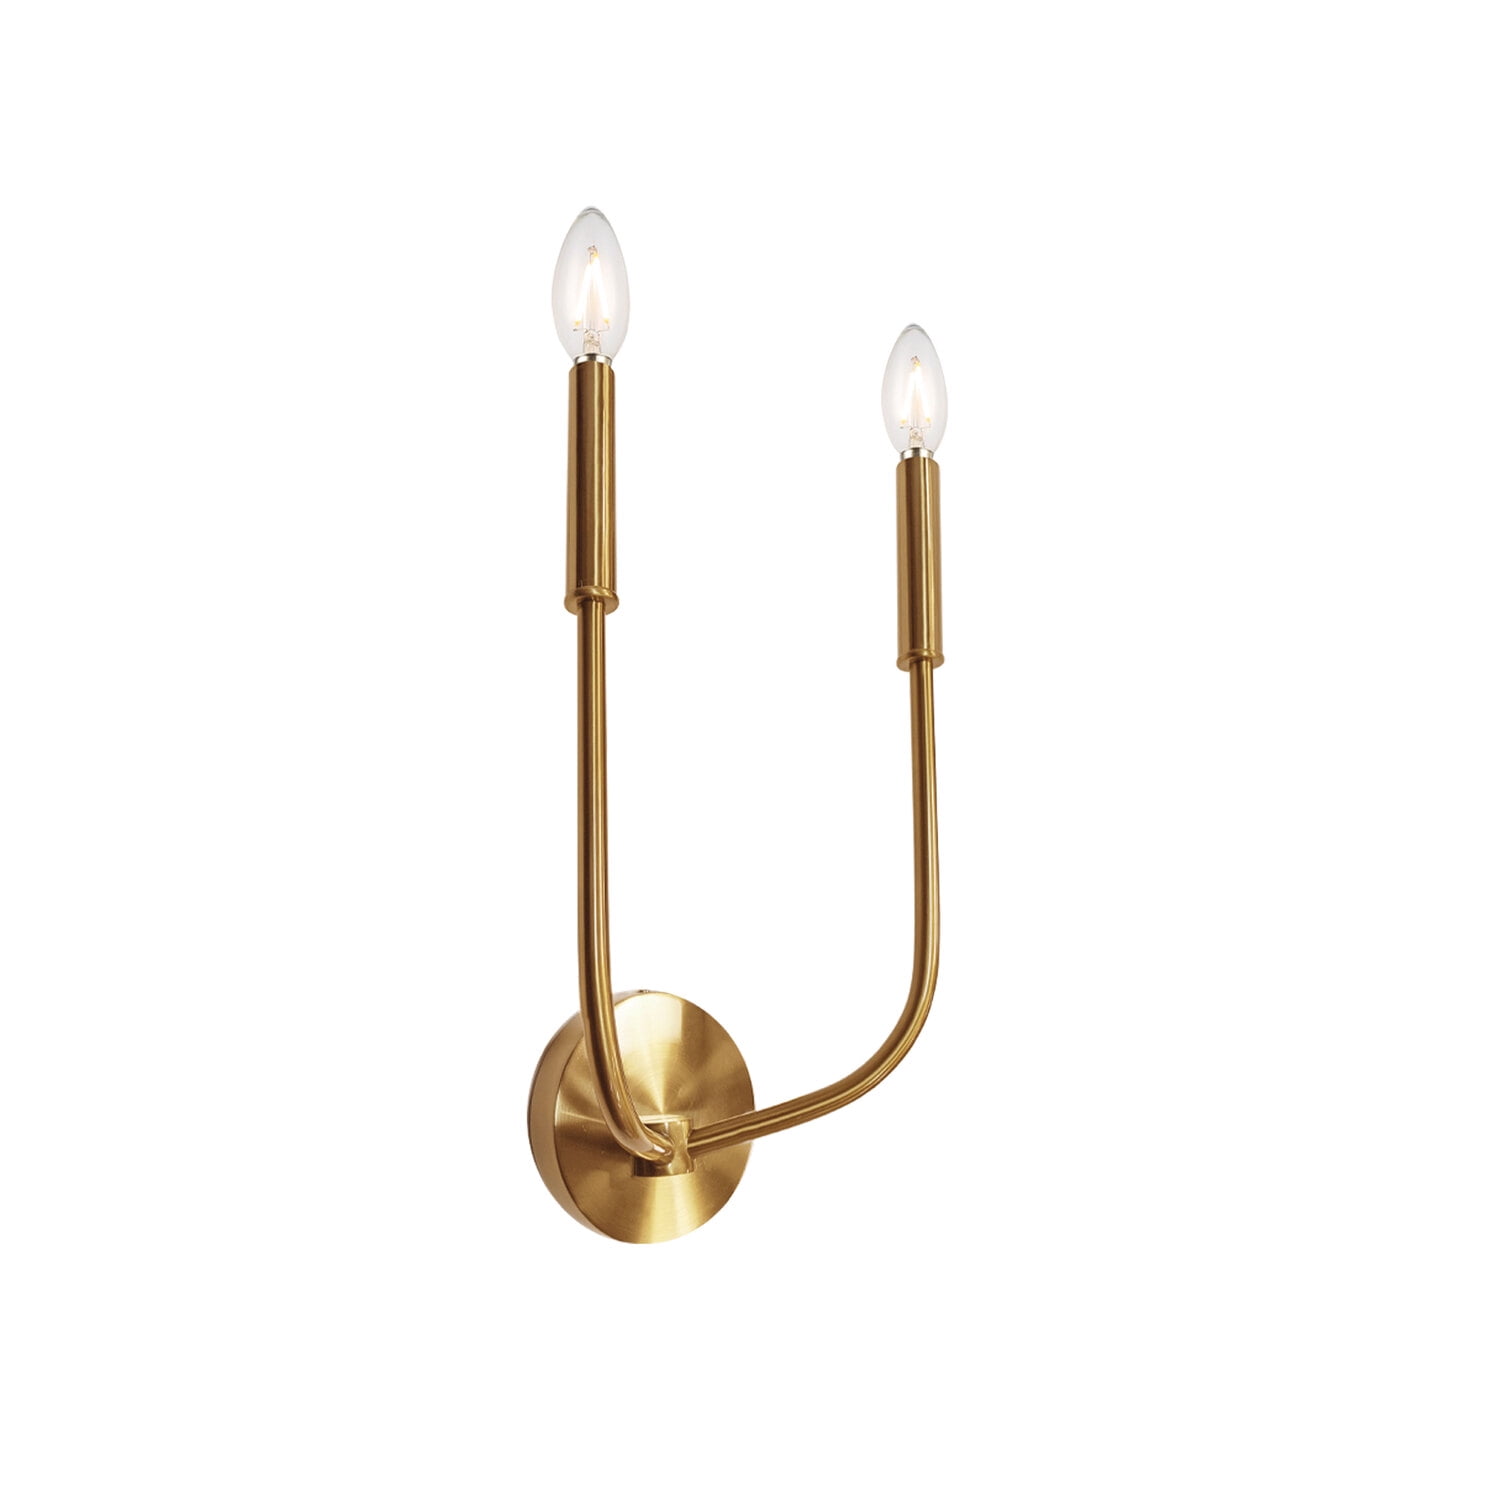 Picture of Dainolite ELN-152W-AGB 2 Light Incandescent Wall Sconce, Aged Brass